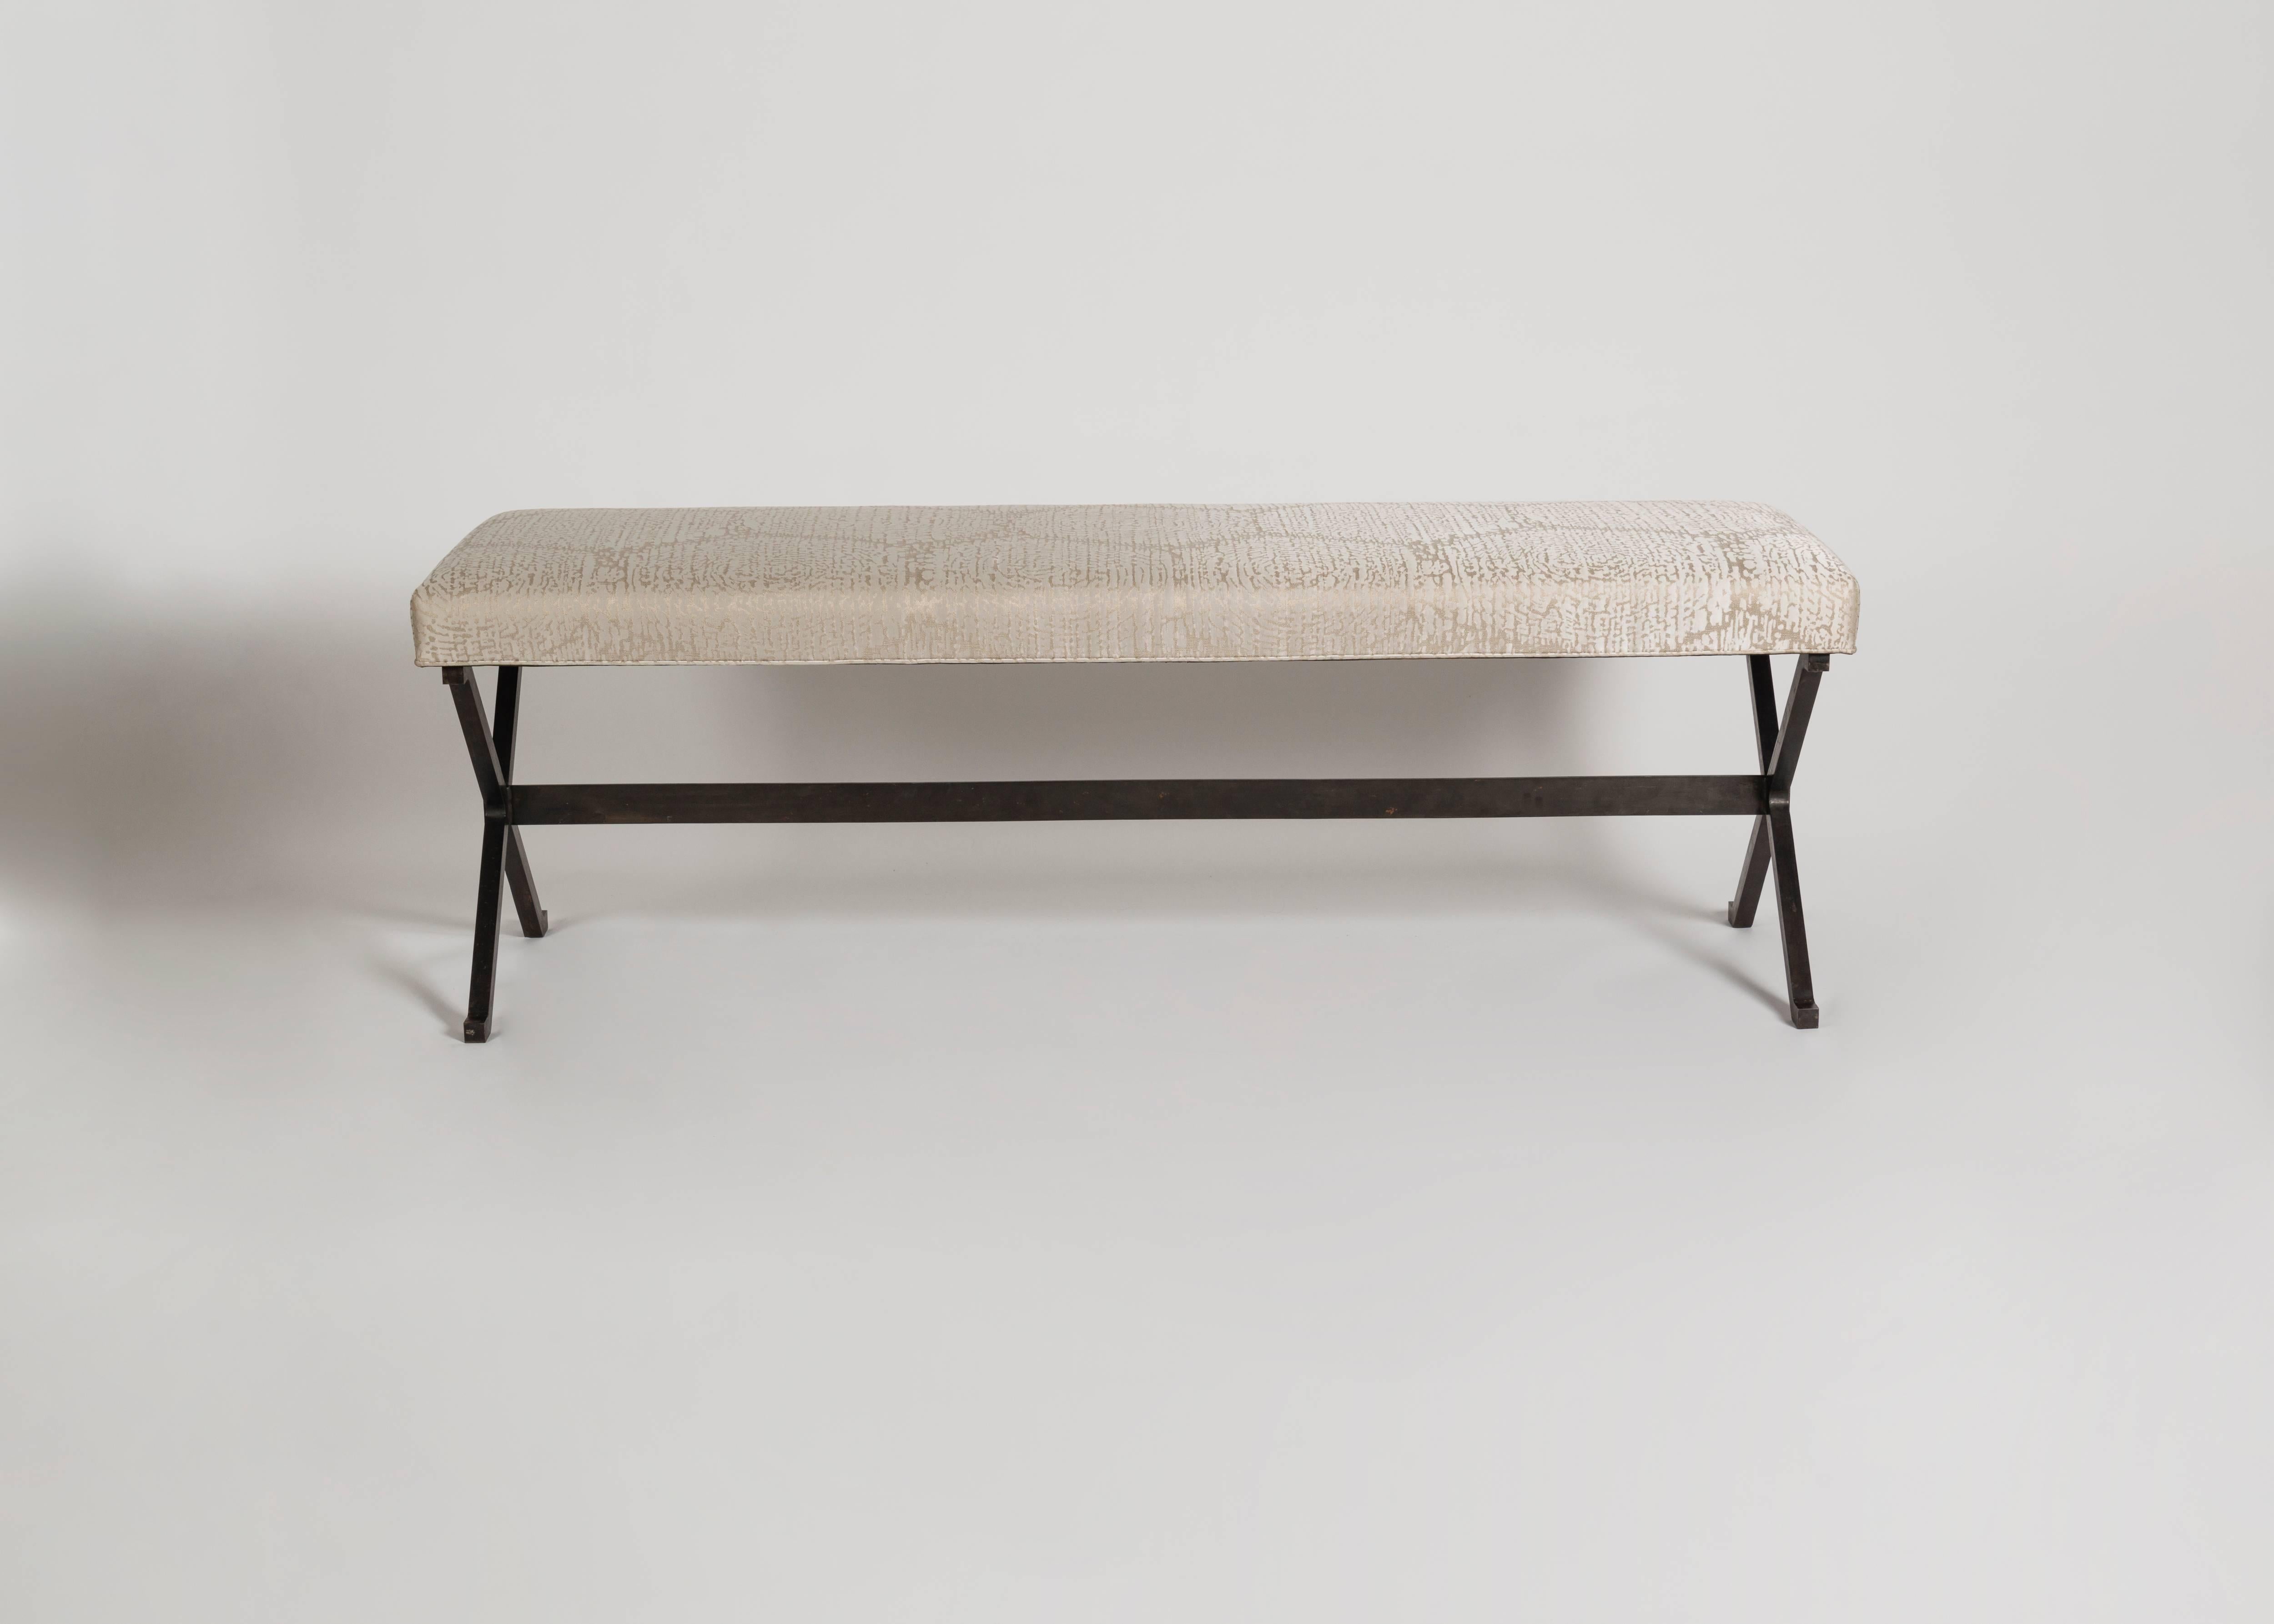 A pair of long cushioned benches, each with a patinated steel base in the form of twin Xs supported by a cross bar.